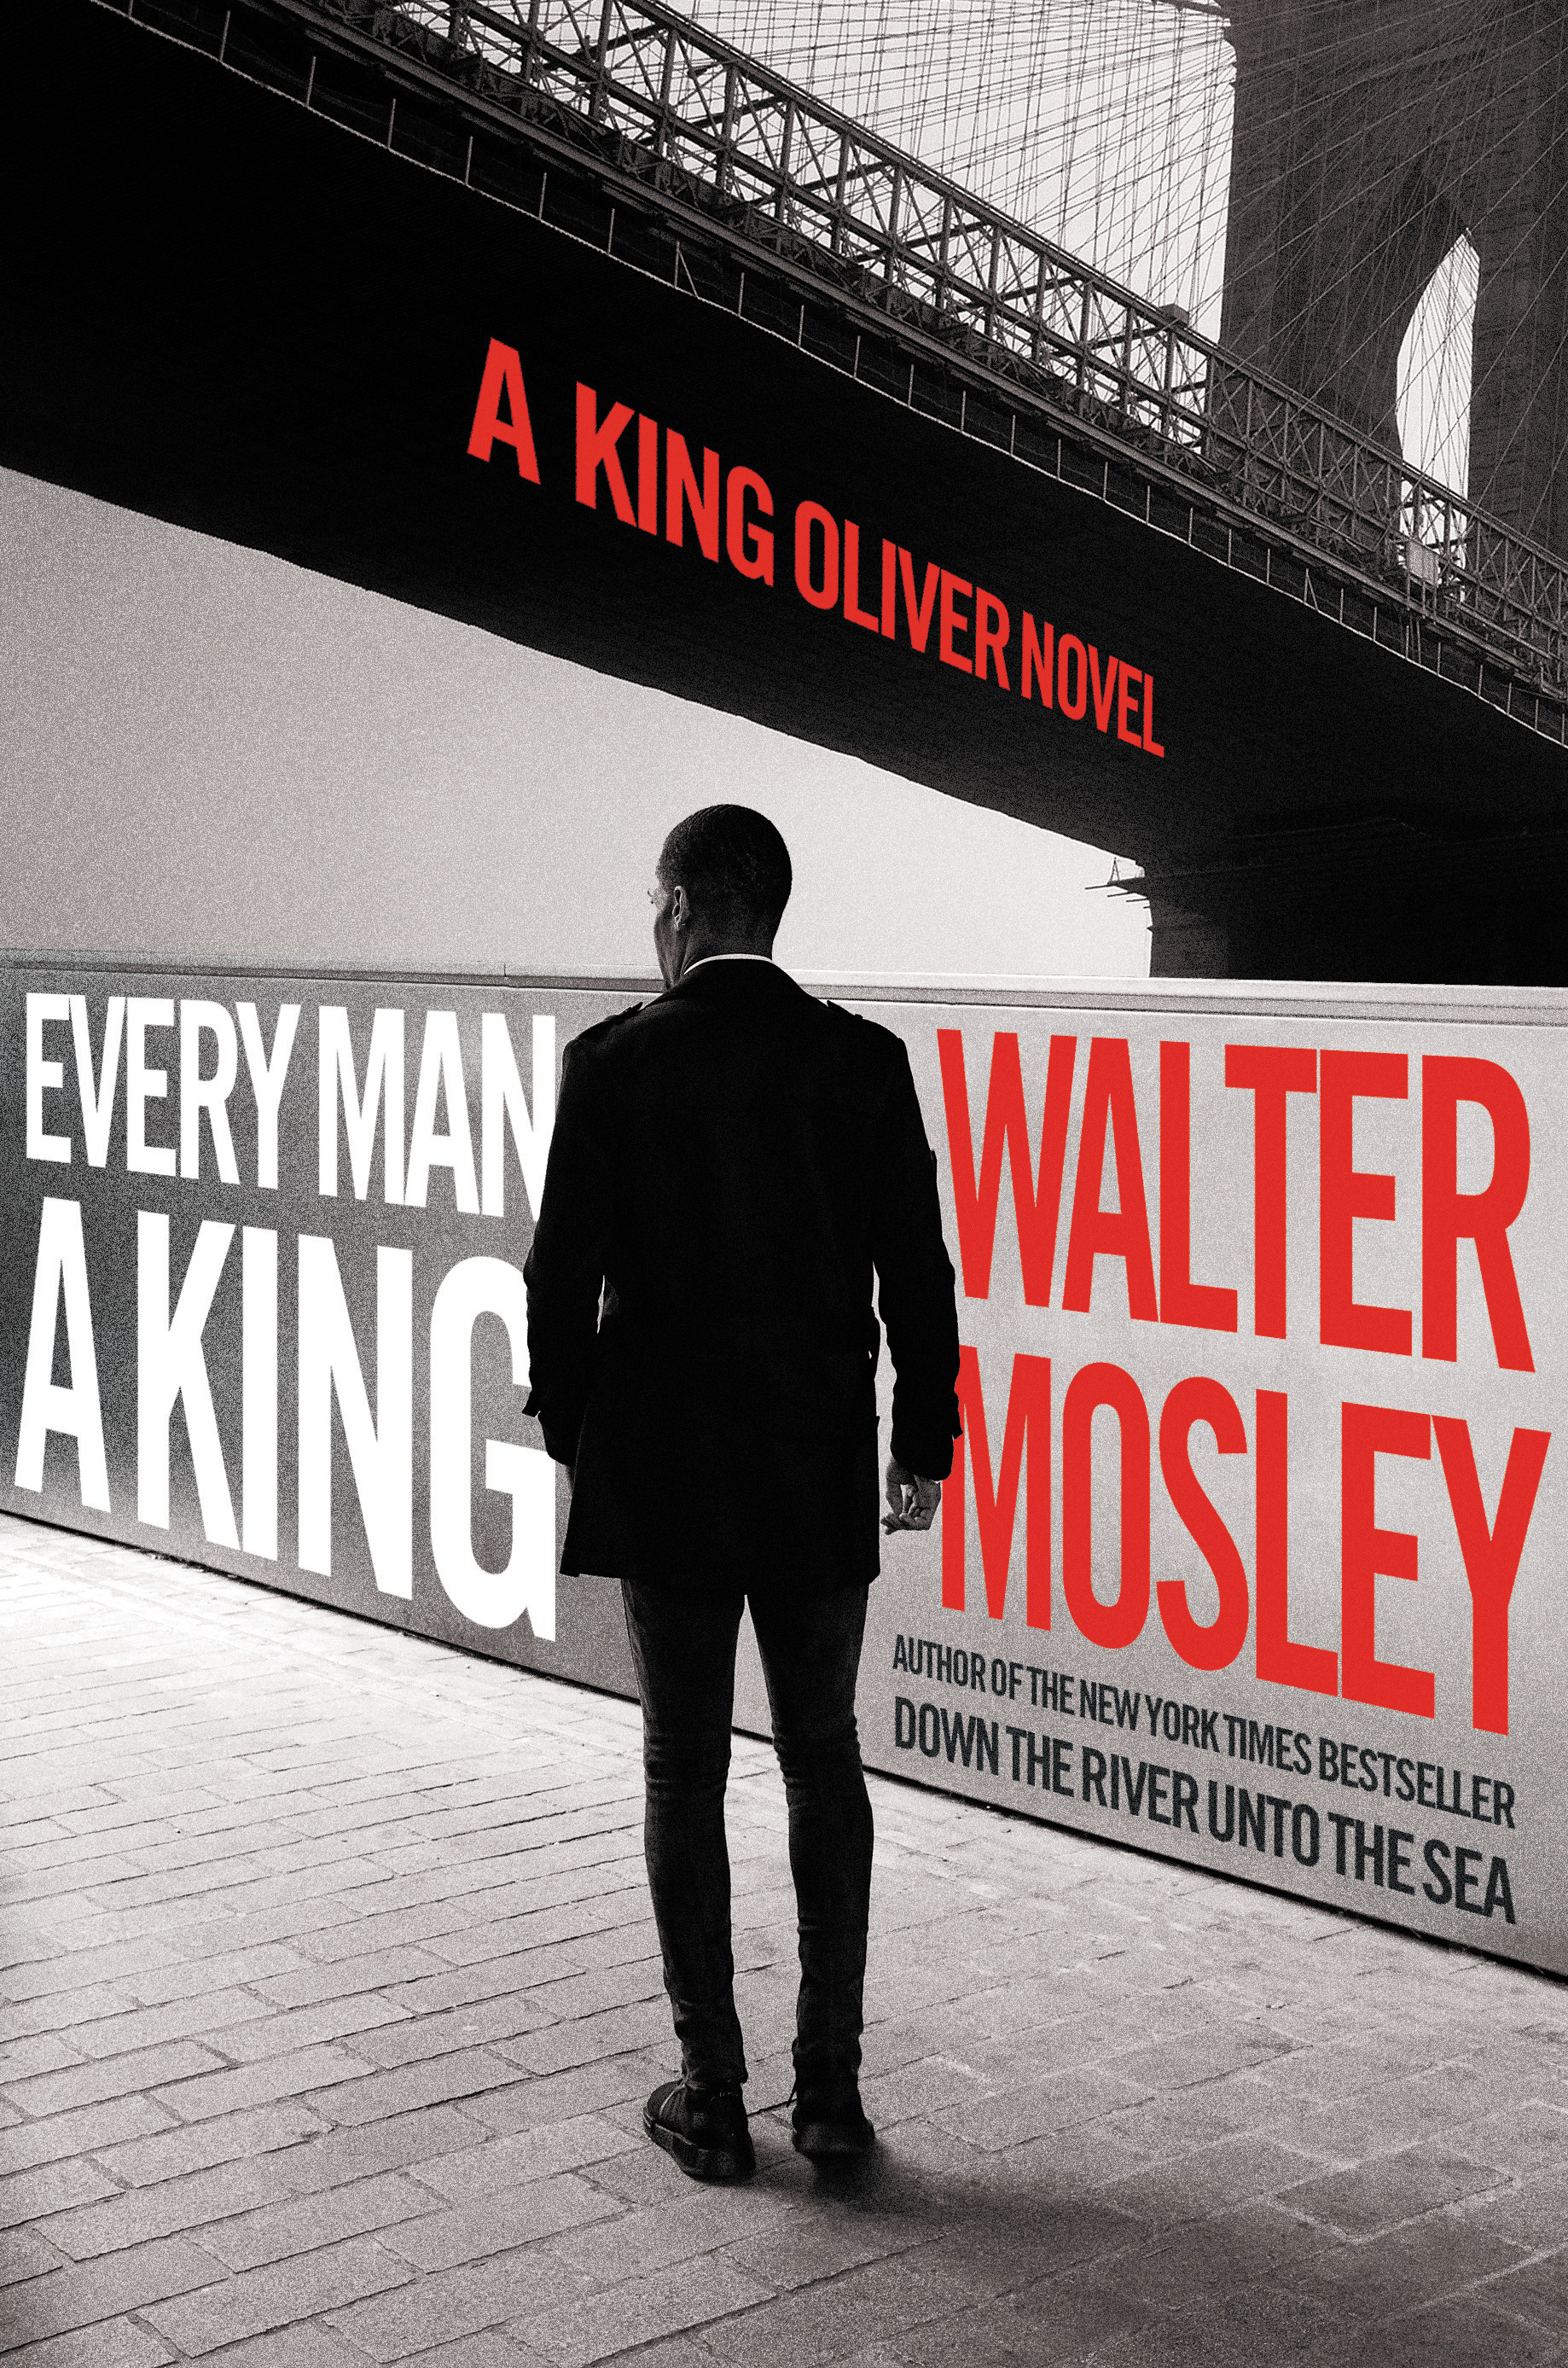 Every Man a King by Walter Mosley